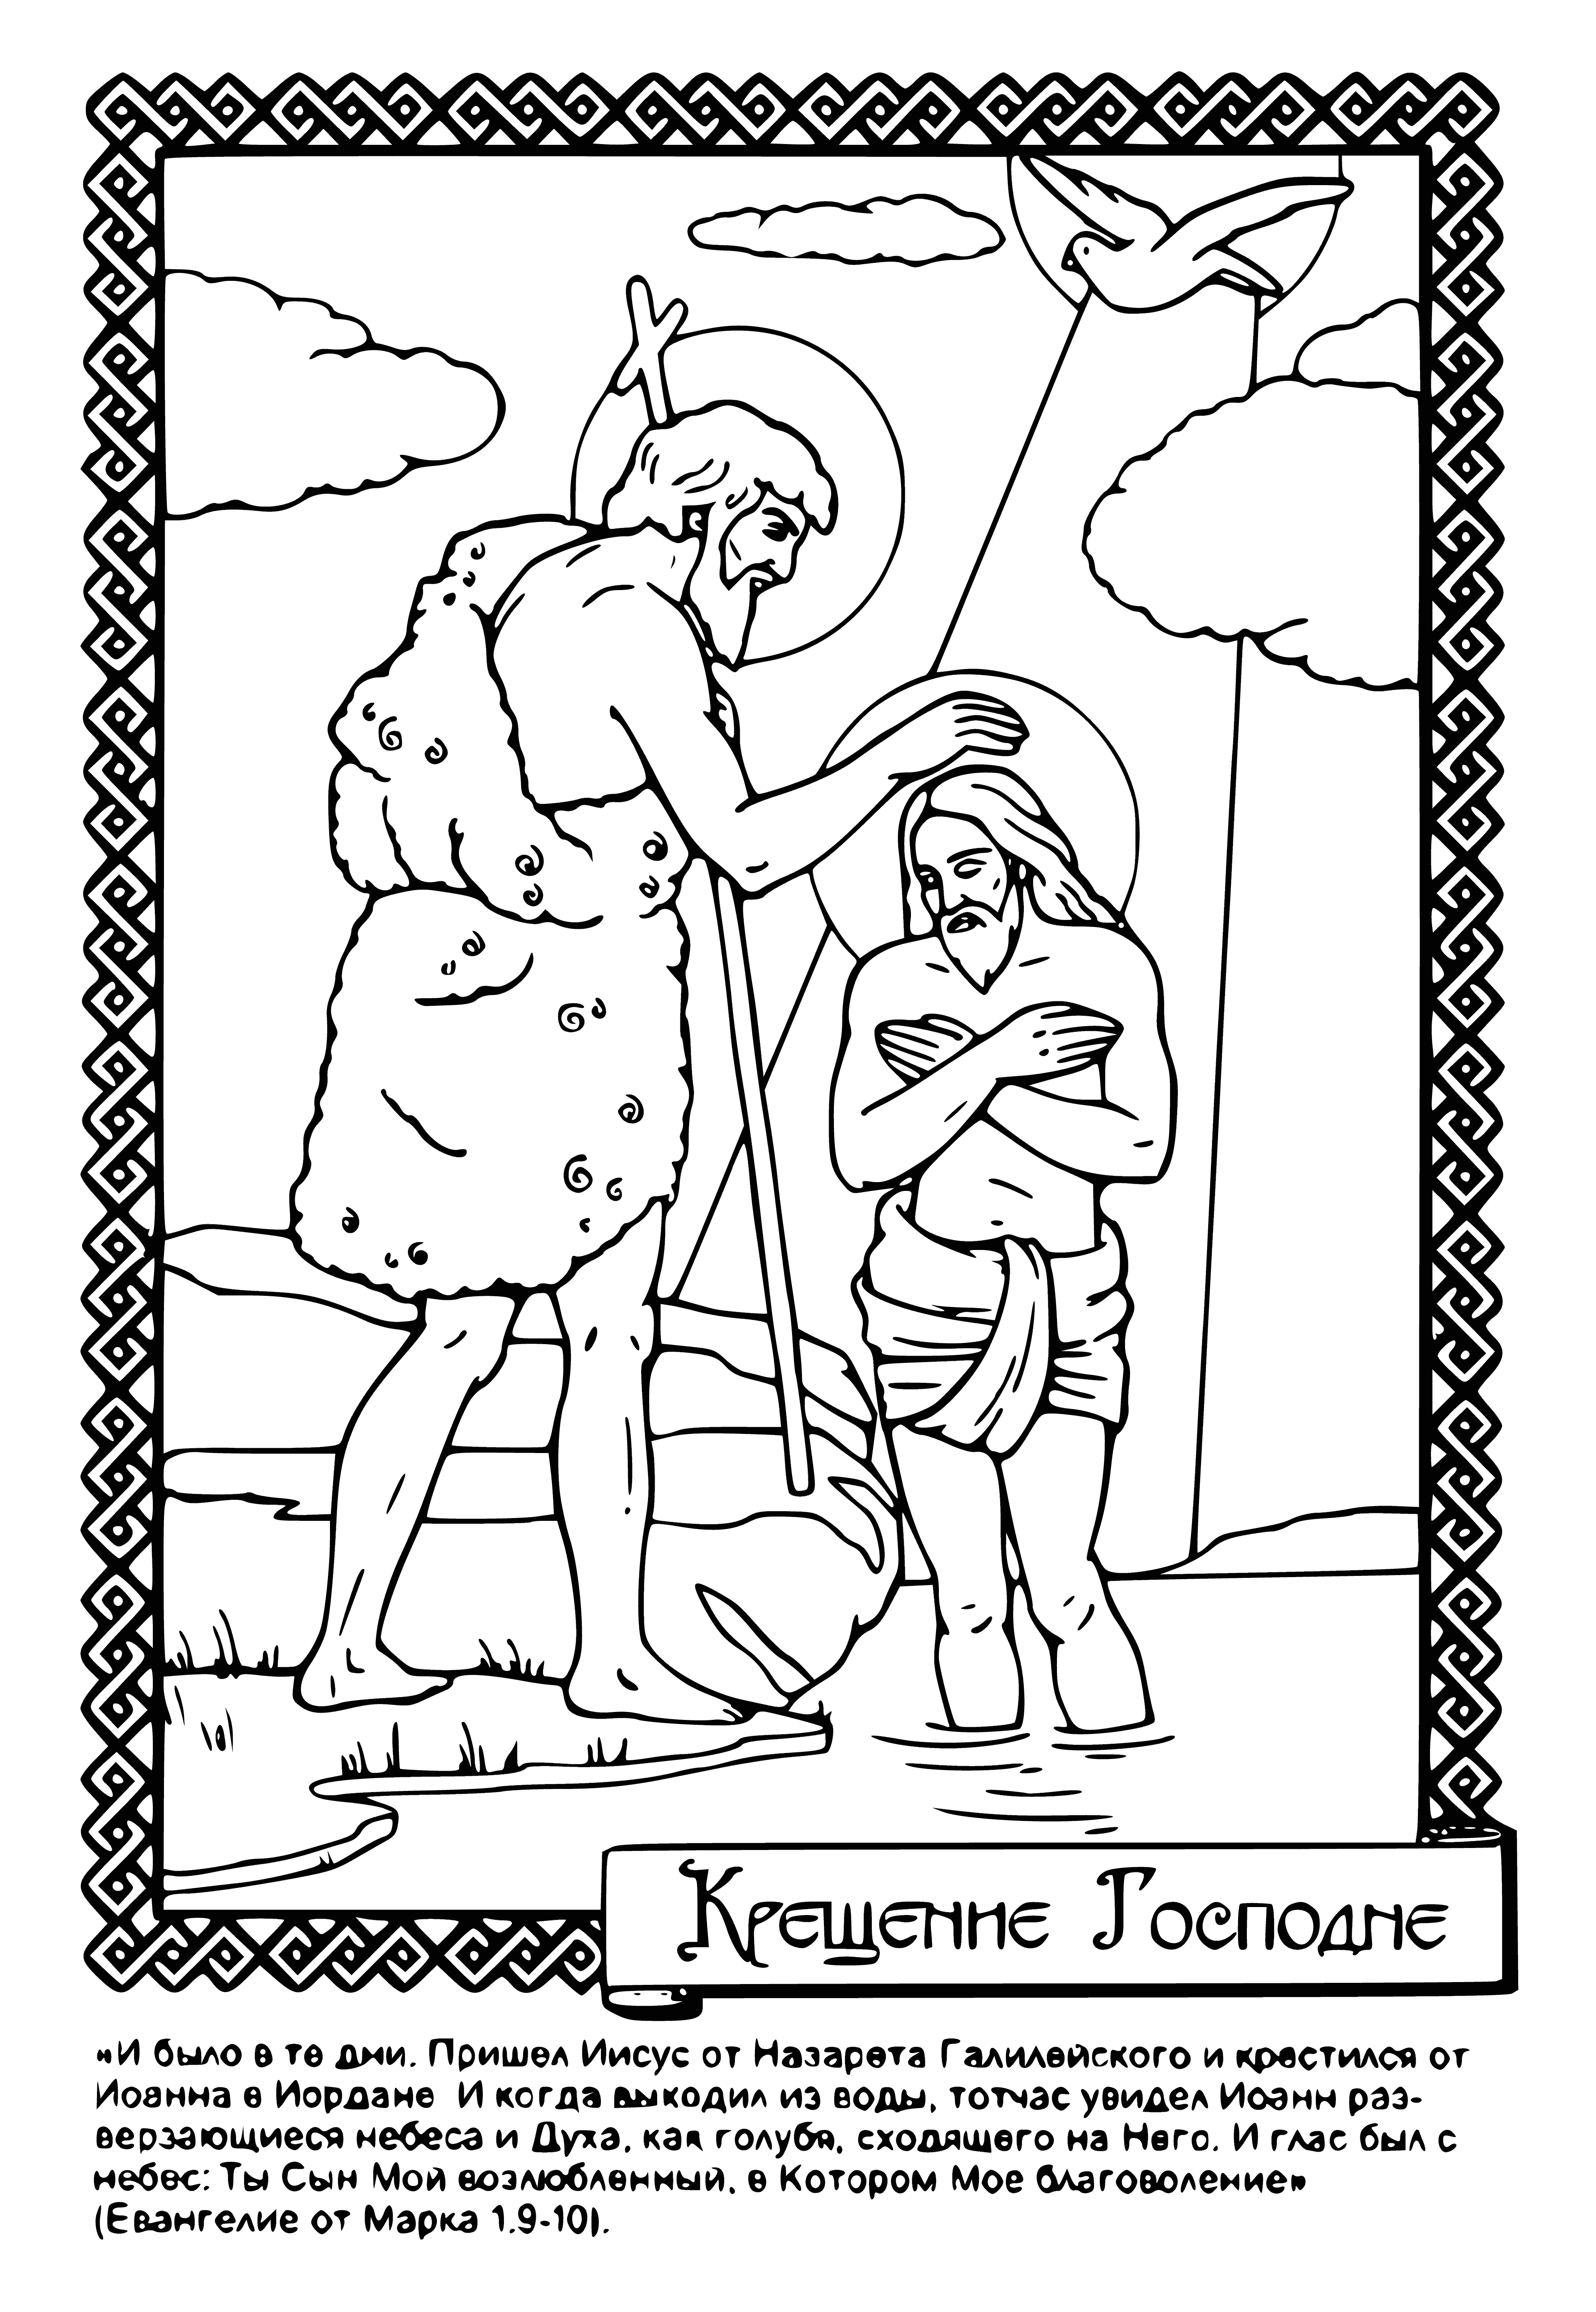 coloring page: Orthodox Christians celebrate Epiphany on Jan. 6th, commemorating Jesus's Baptism in the Jordan River, reminding us that Christ revealed his divine nature to the world.